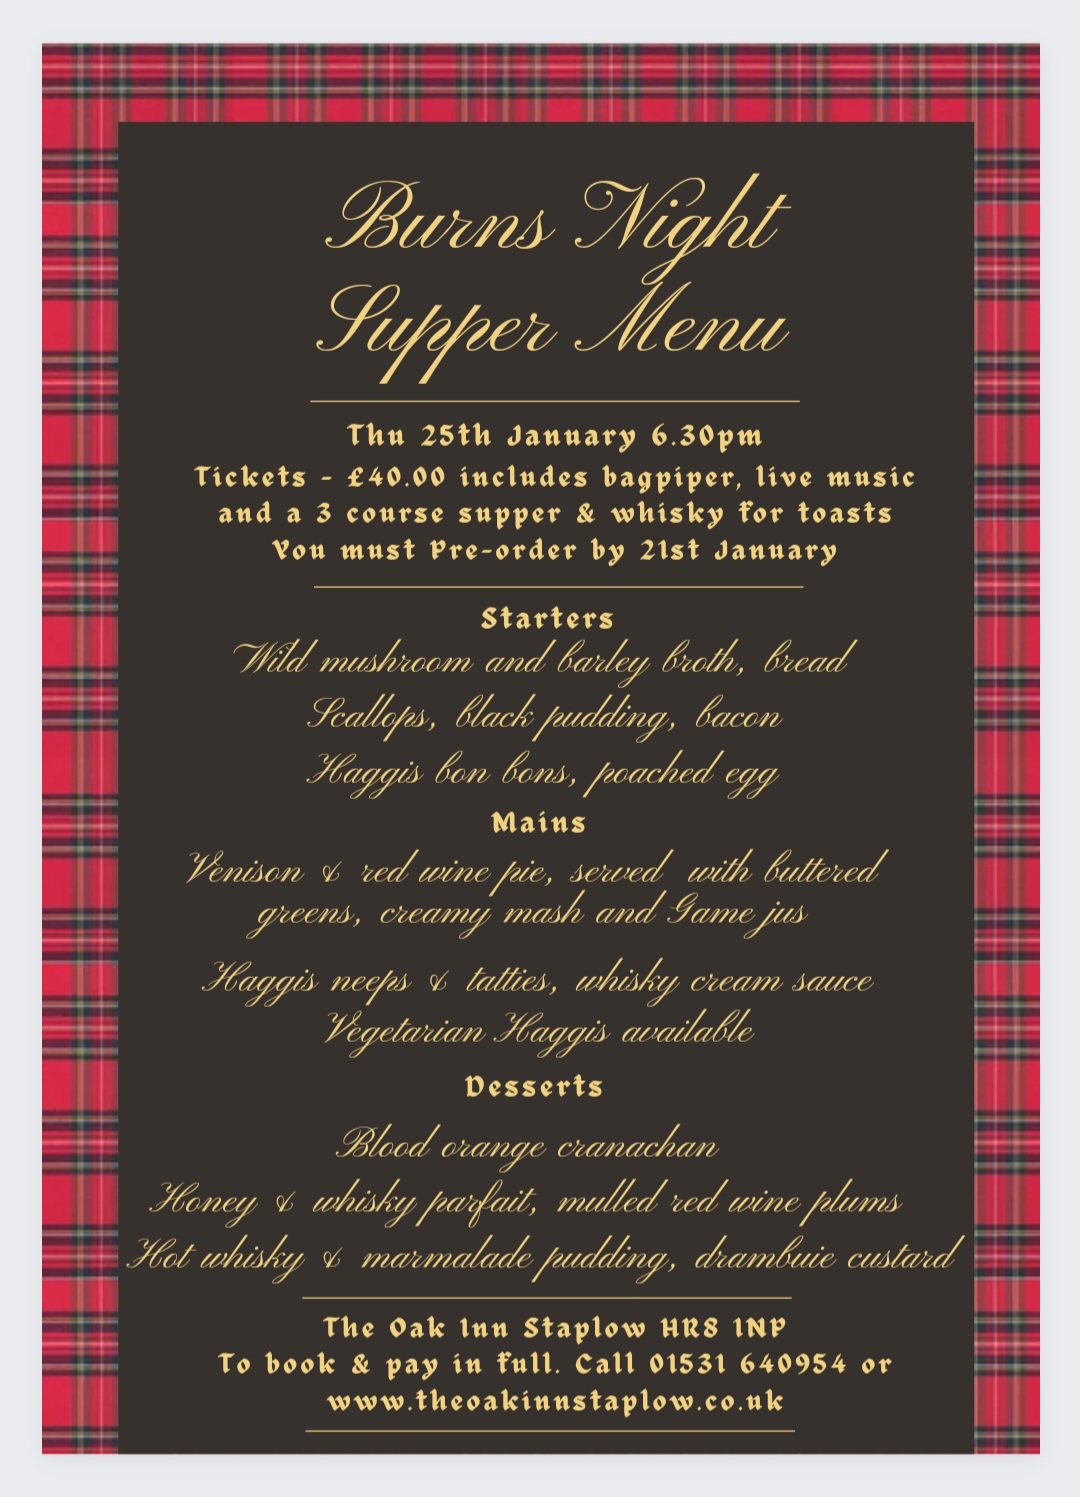 Join us for a full blown BURNS NIGHT SUPPER on Thursday 25th January at 6.30pm. We have a Haggis, Bagpipes, Music and Whiskey! Plus all the usual traditions of a typical BURNS NIGHT! ­ЪЈ┤заЂДзаЂбзаЂ│заЂБзаЂ┤заЂ┐­ЪЈ┤заЂДзаЂбзаЂ│заЂБзаЂ┤заЂ┐­ЪЈ┤заЂДзаЂбзаЂ│заЂБзаЂ┤заЂ┐